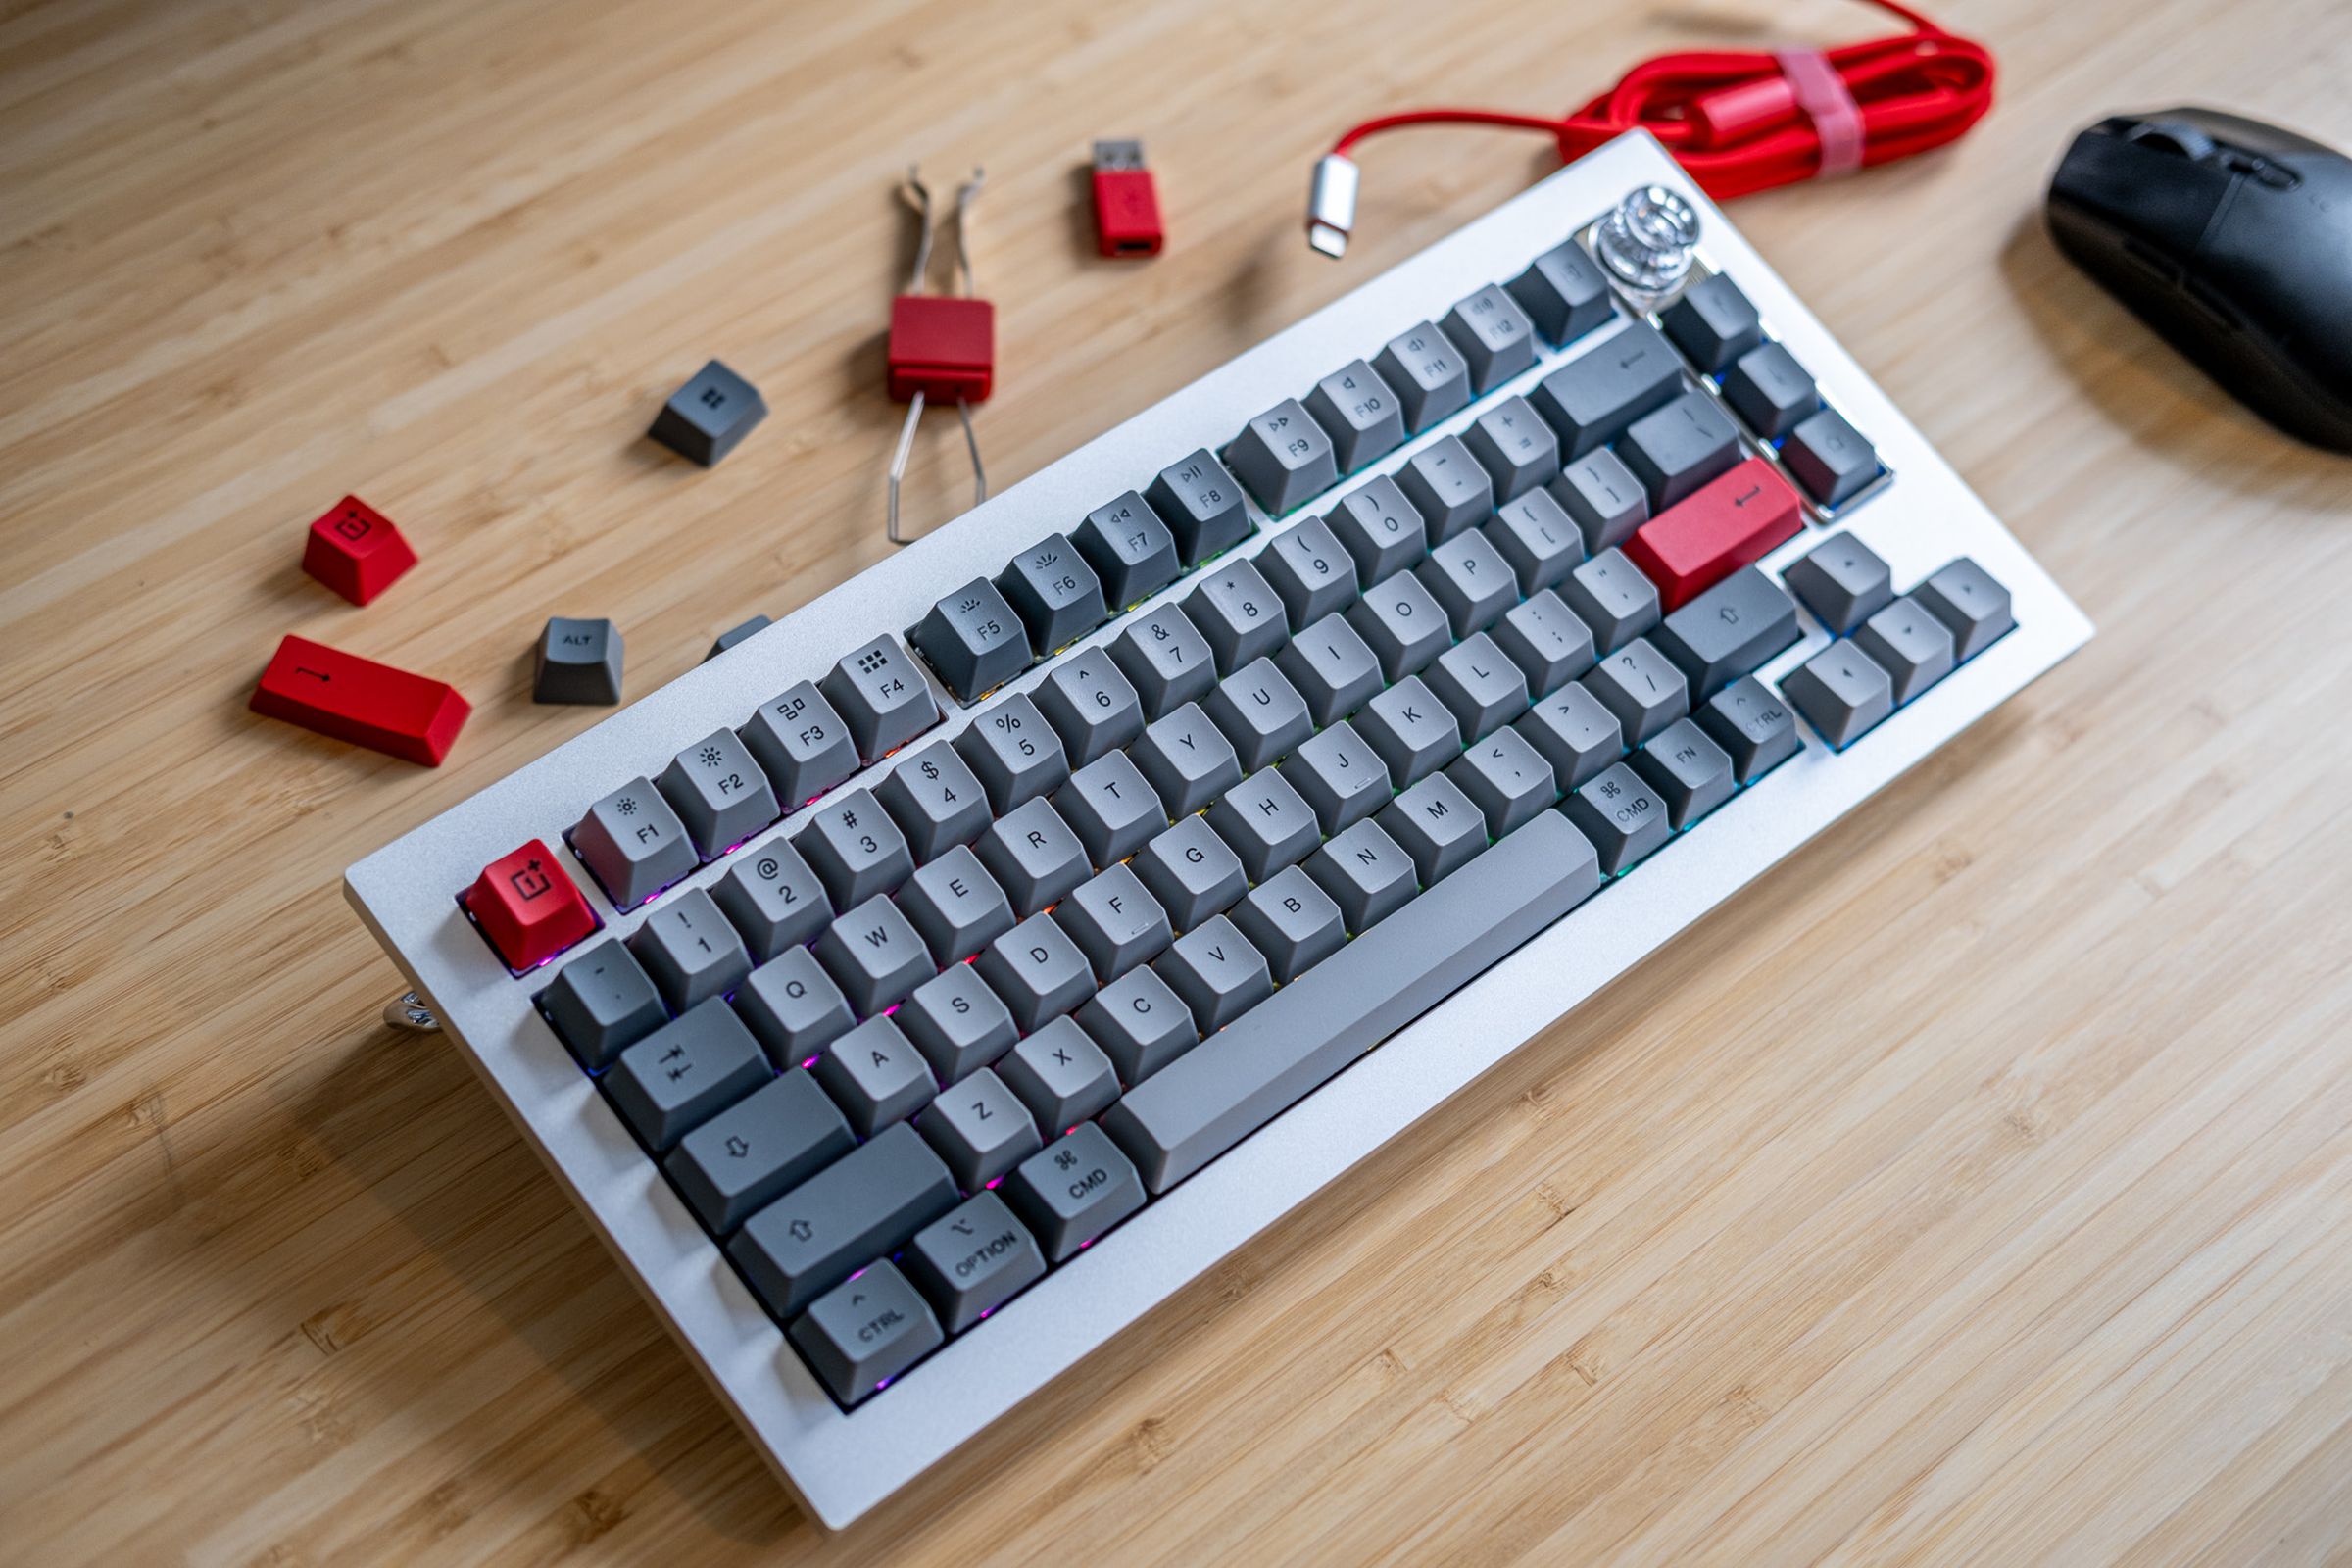 OnePlus keyboard on desk surrounded by accessories.